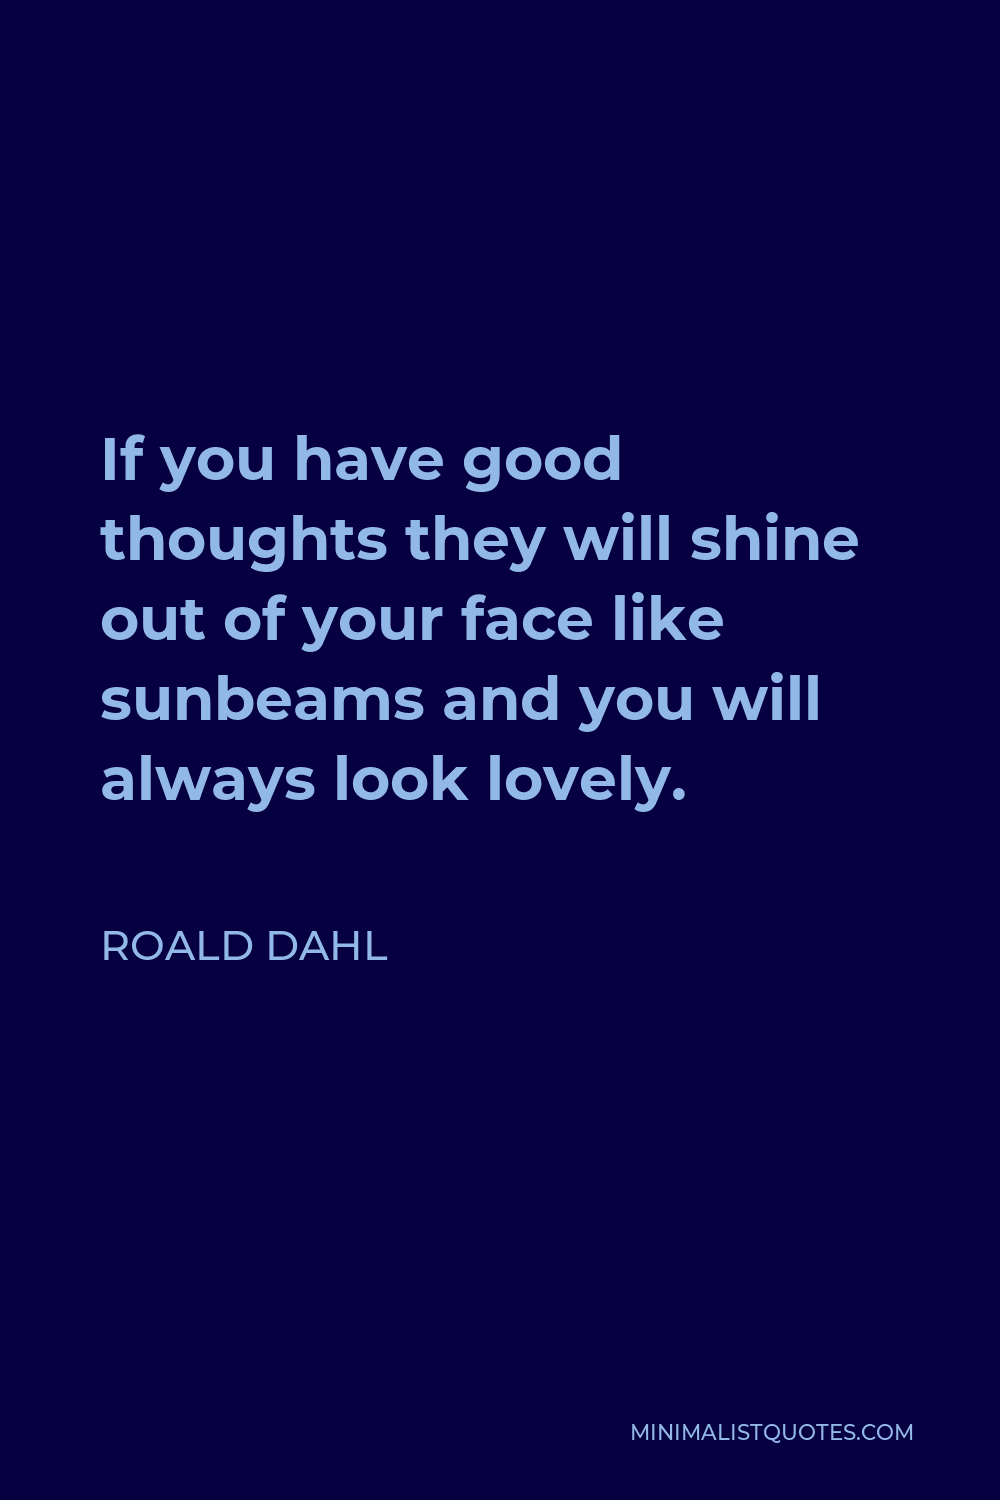 Roald Dahl Quote - If you have good thoughts they will shine out of your face like sunbeams and you will always look lovely.